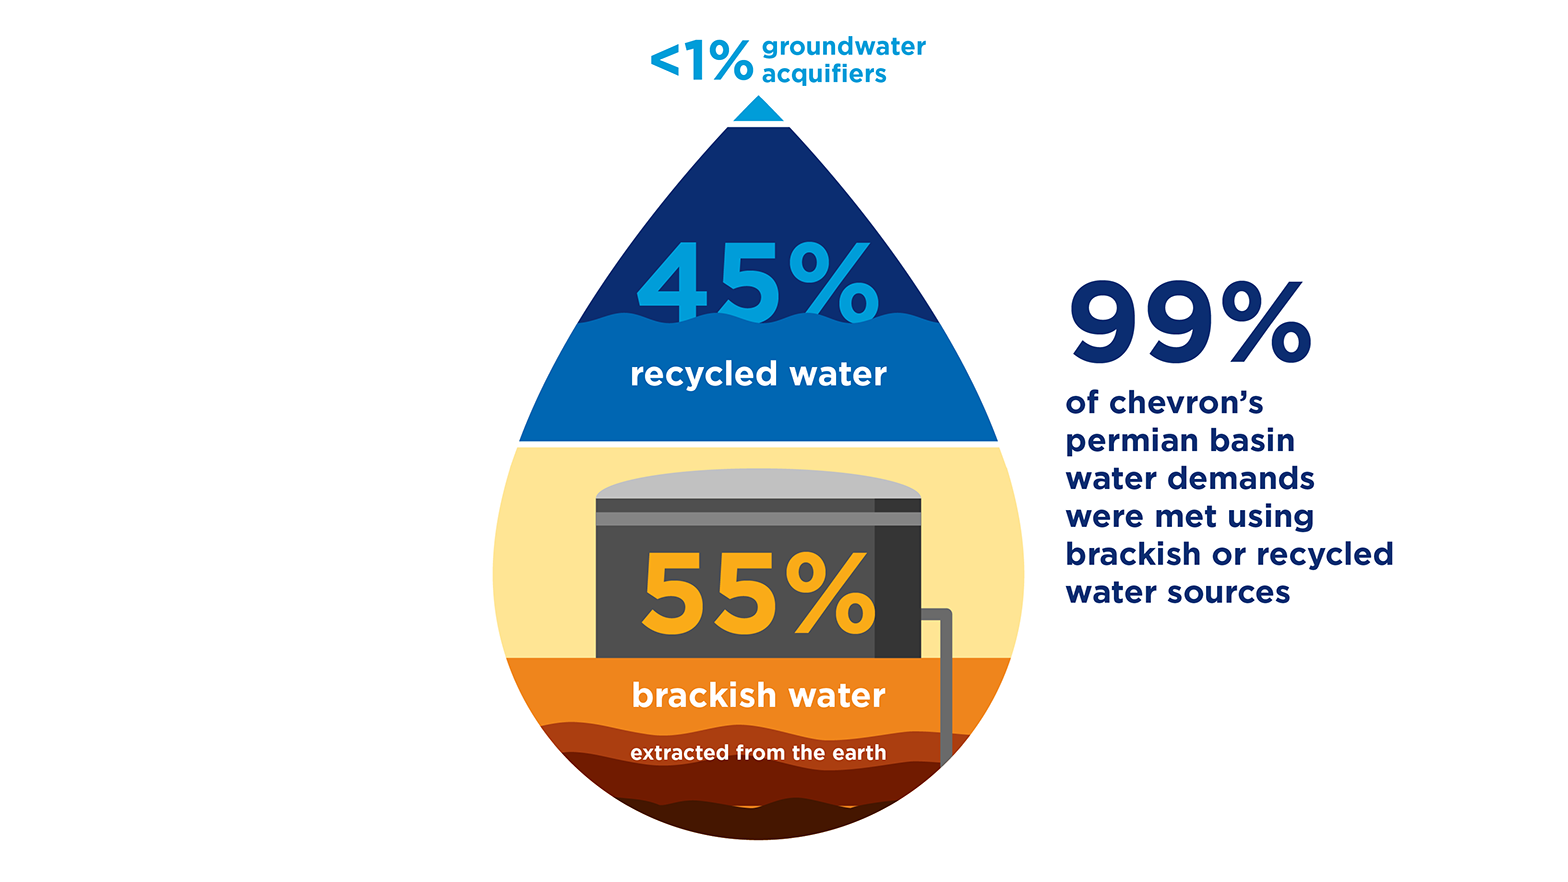 Infographic depicting that 99% of Chevron's permian basin water demands were met using brackish (55%) or recycled water (45%) sources, with less than 1% groundwater aquifers.